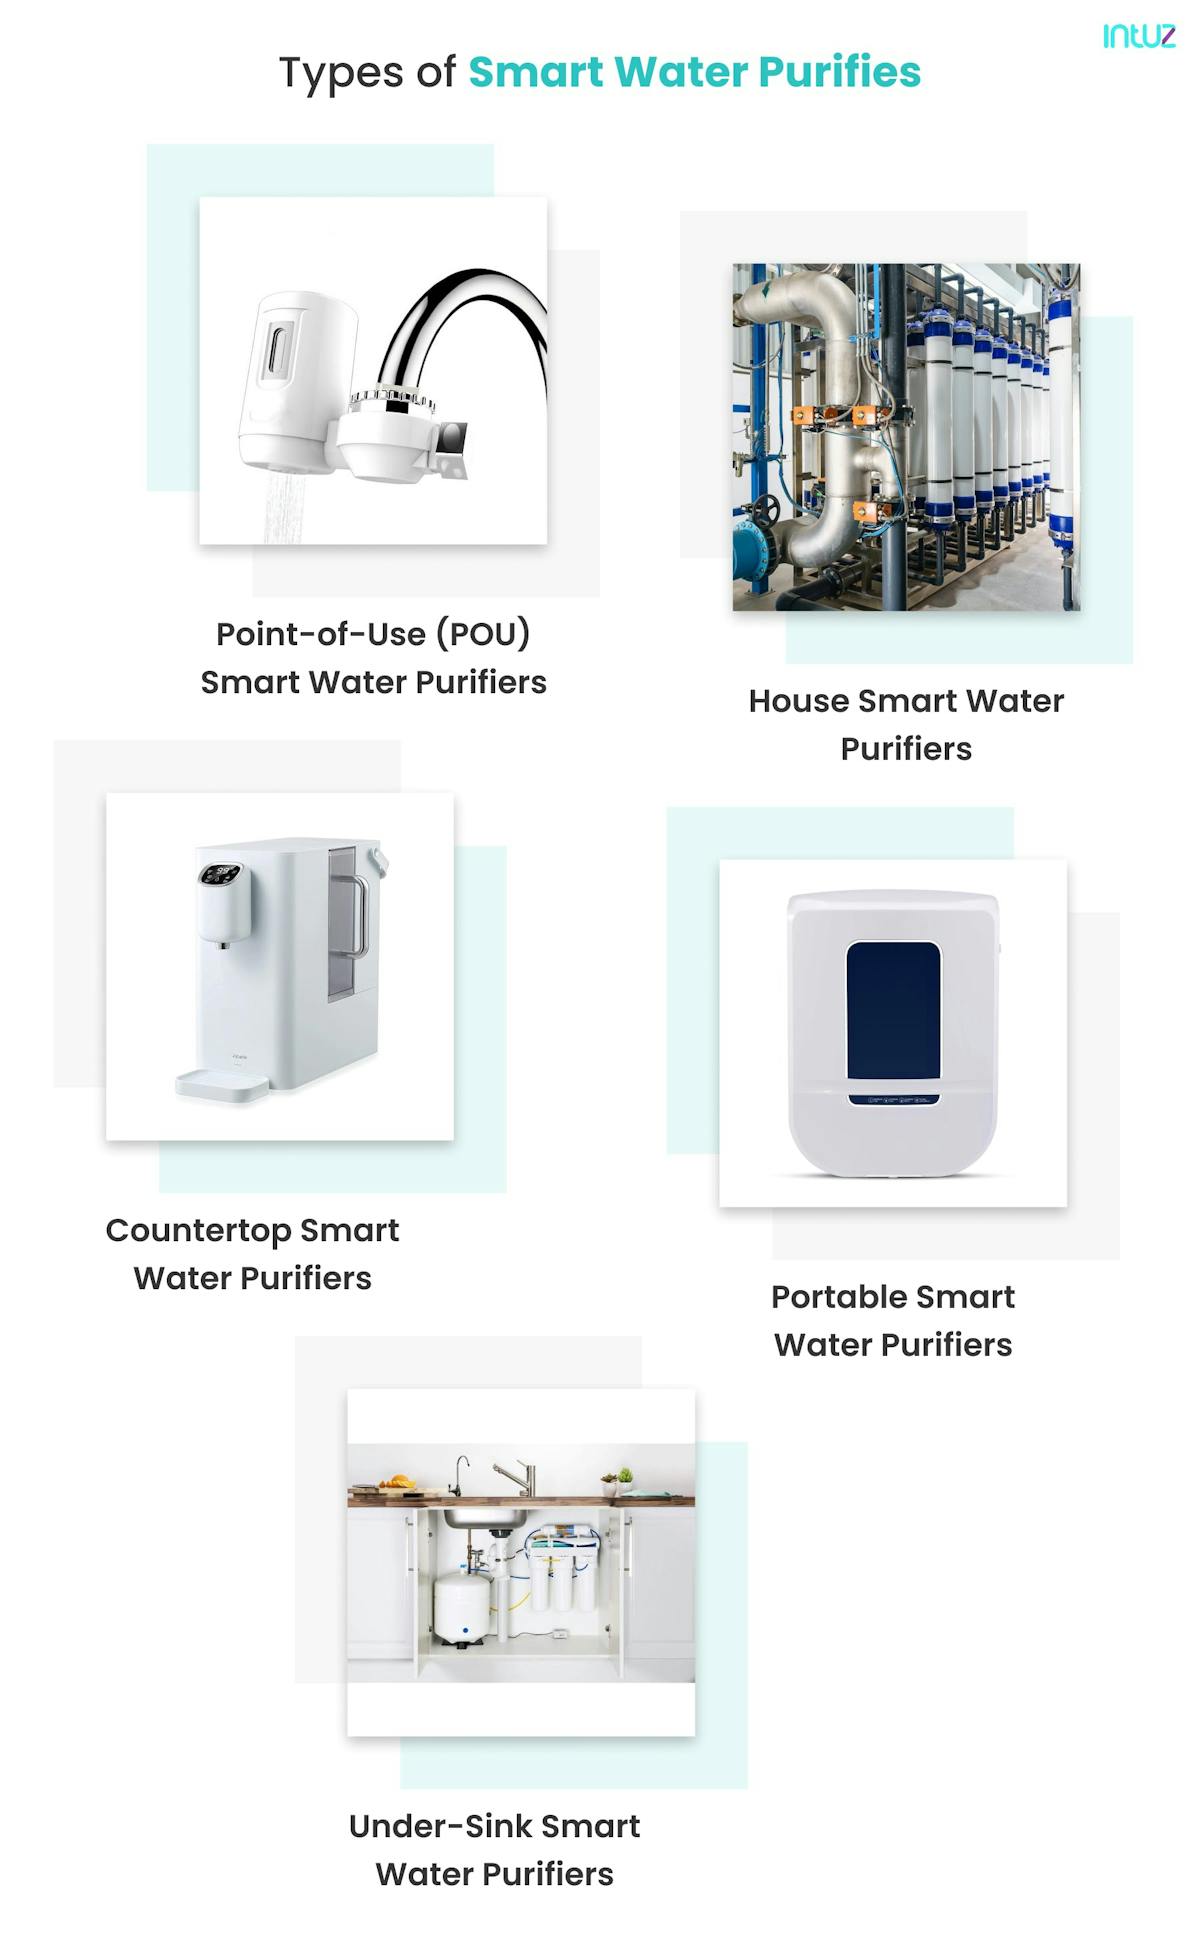 Types of Smart Water Purifiers